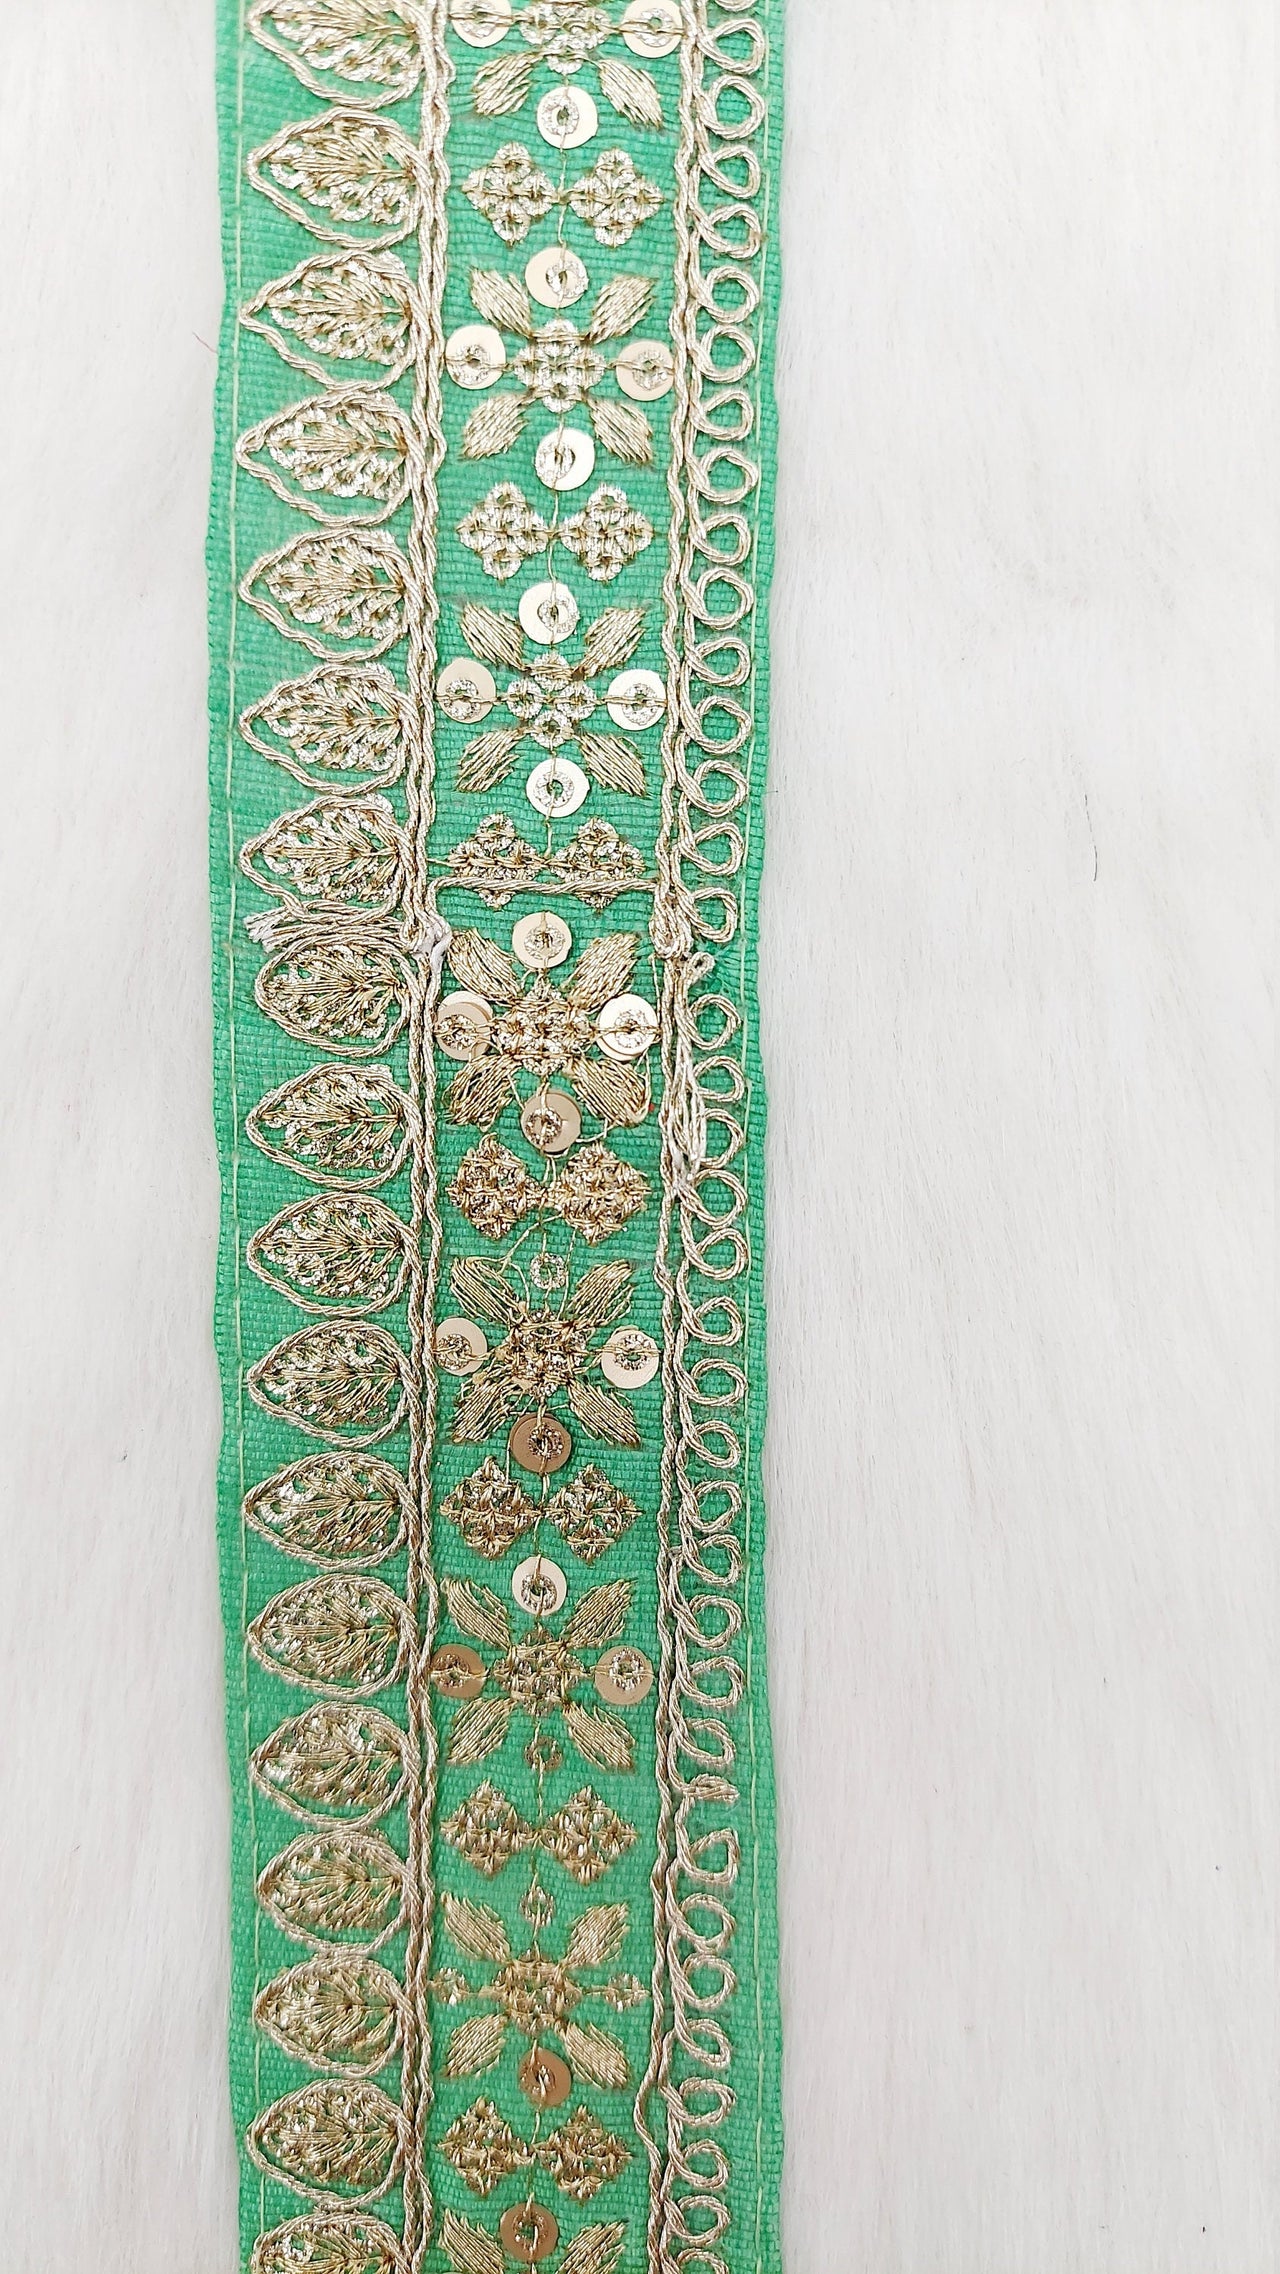 Green Art Silk Fabric Trim With Gold Floral Embroidery, Floral Sequins Sari Border, Trim By 9 Yards